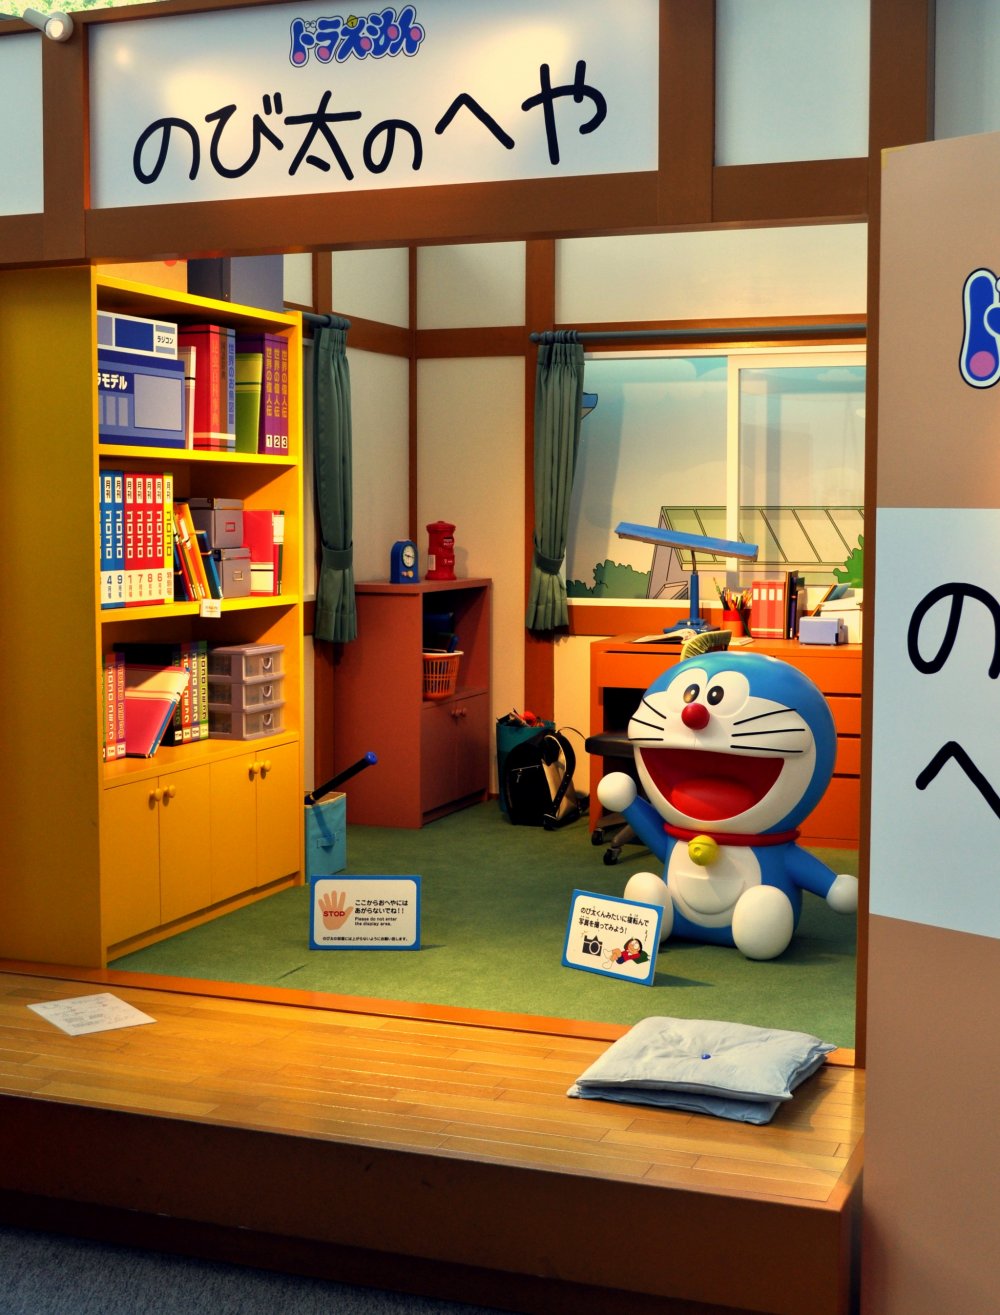 Get your picture taken with the happy face of Doraemon